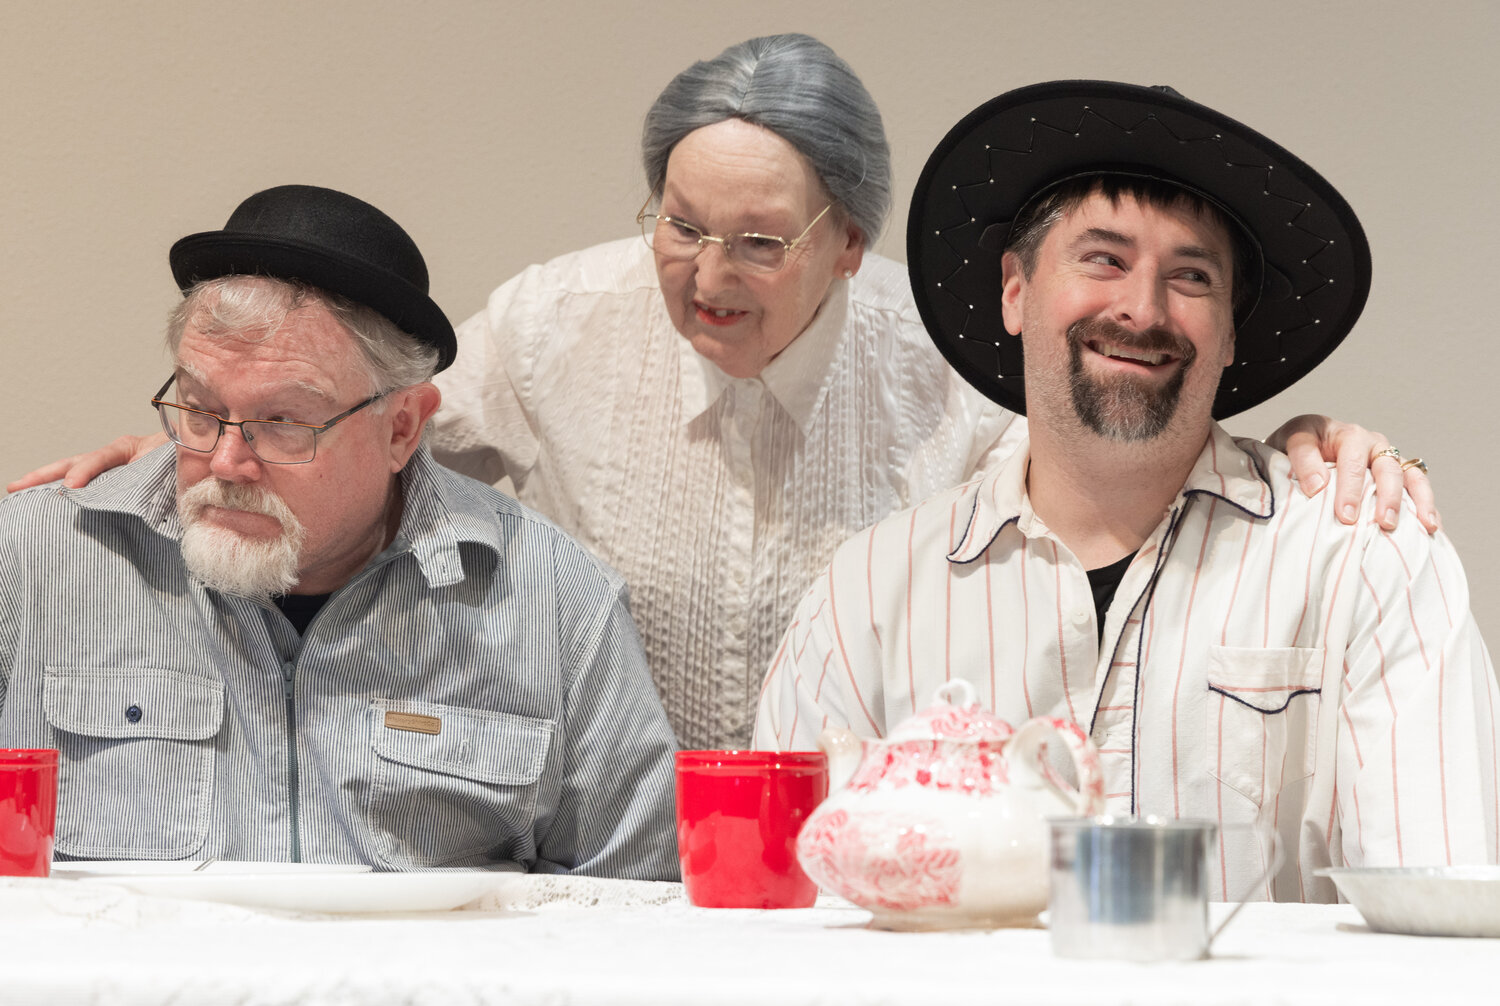 Randy Humphreys as Hector Bogonzoles, Kay Morton as Louise Binder and Alex Johnson as Jake Headley perform on stage during dress rehearsals for the Christmas at Rattlesnake Gulch play at Mountain View Baptist Church in Centralia.